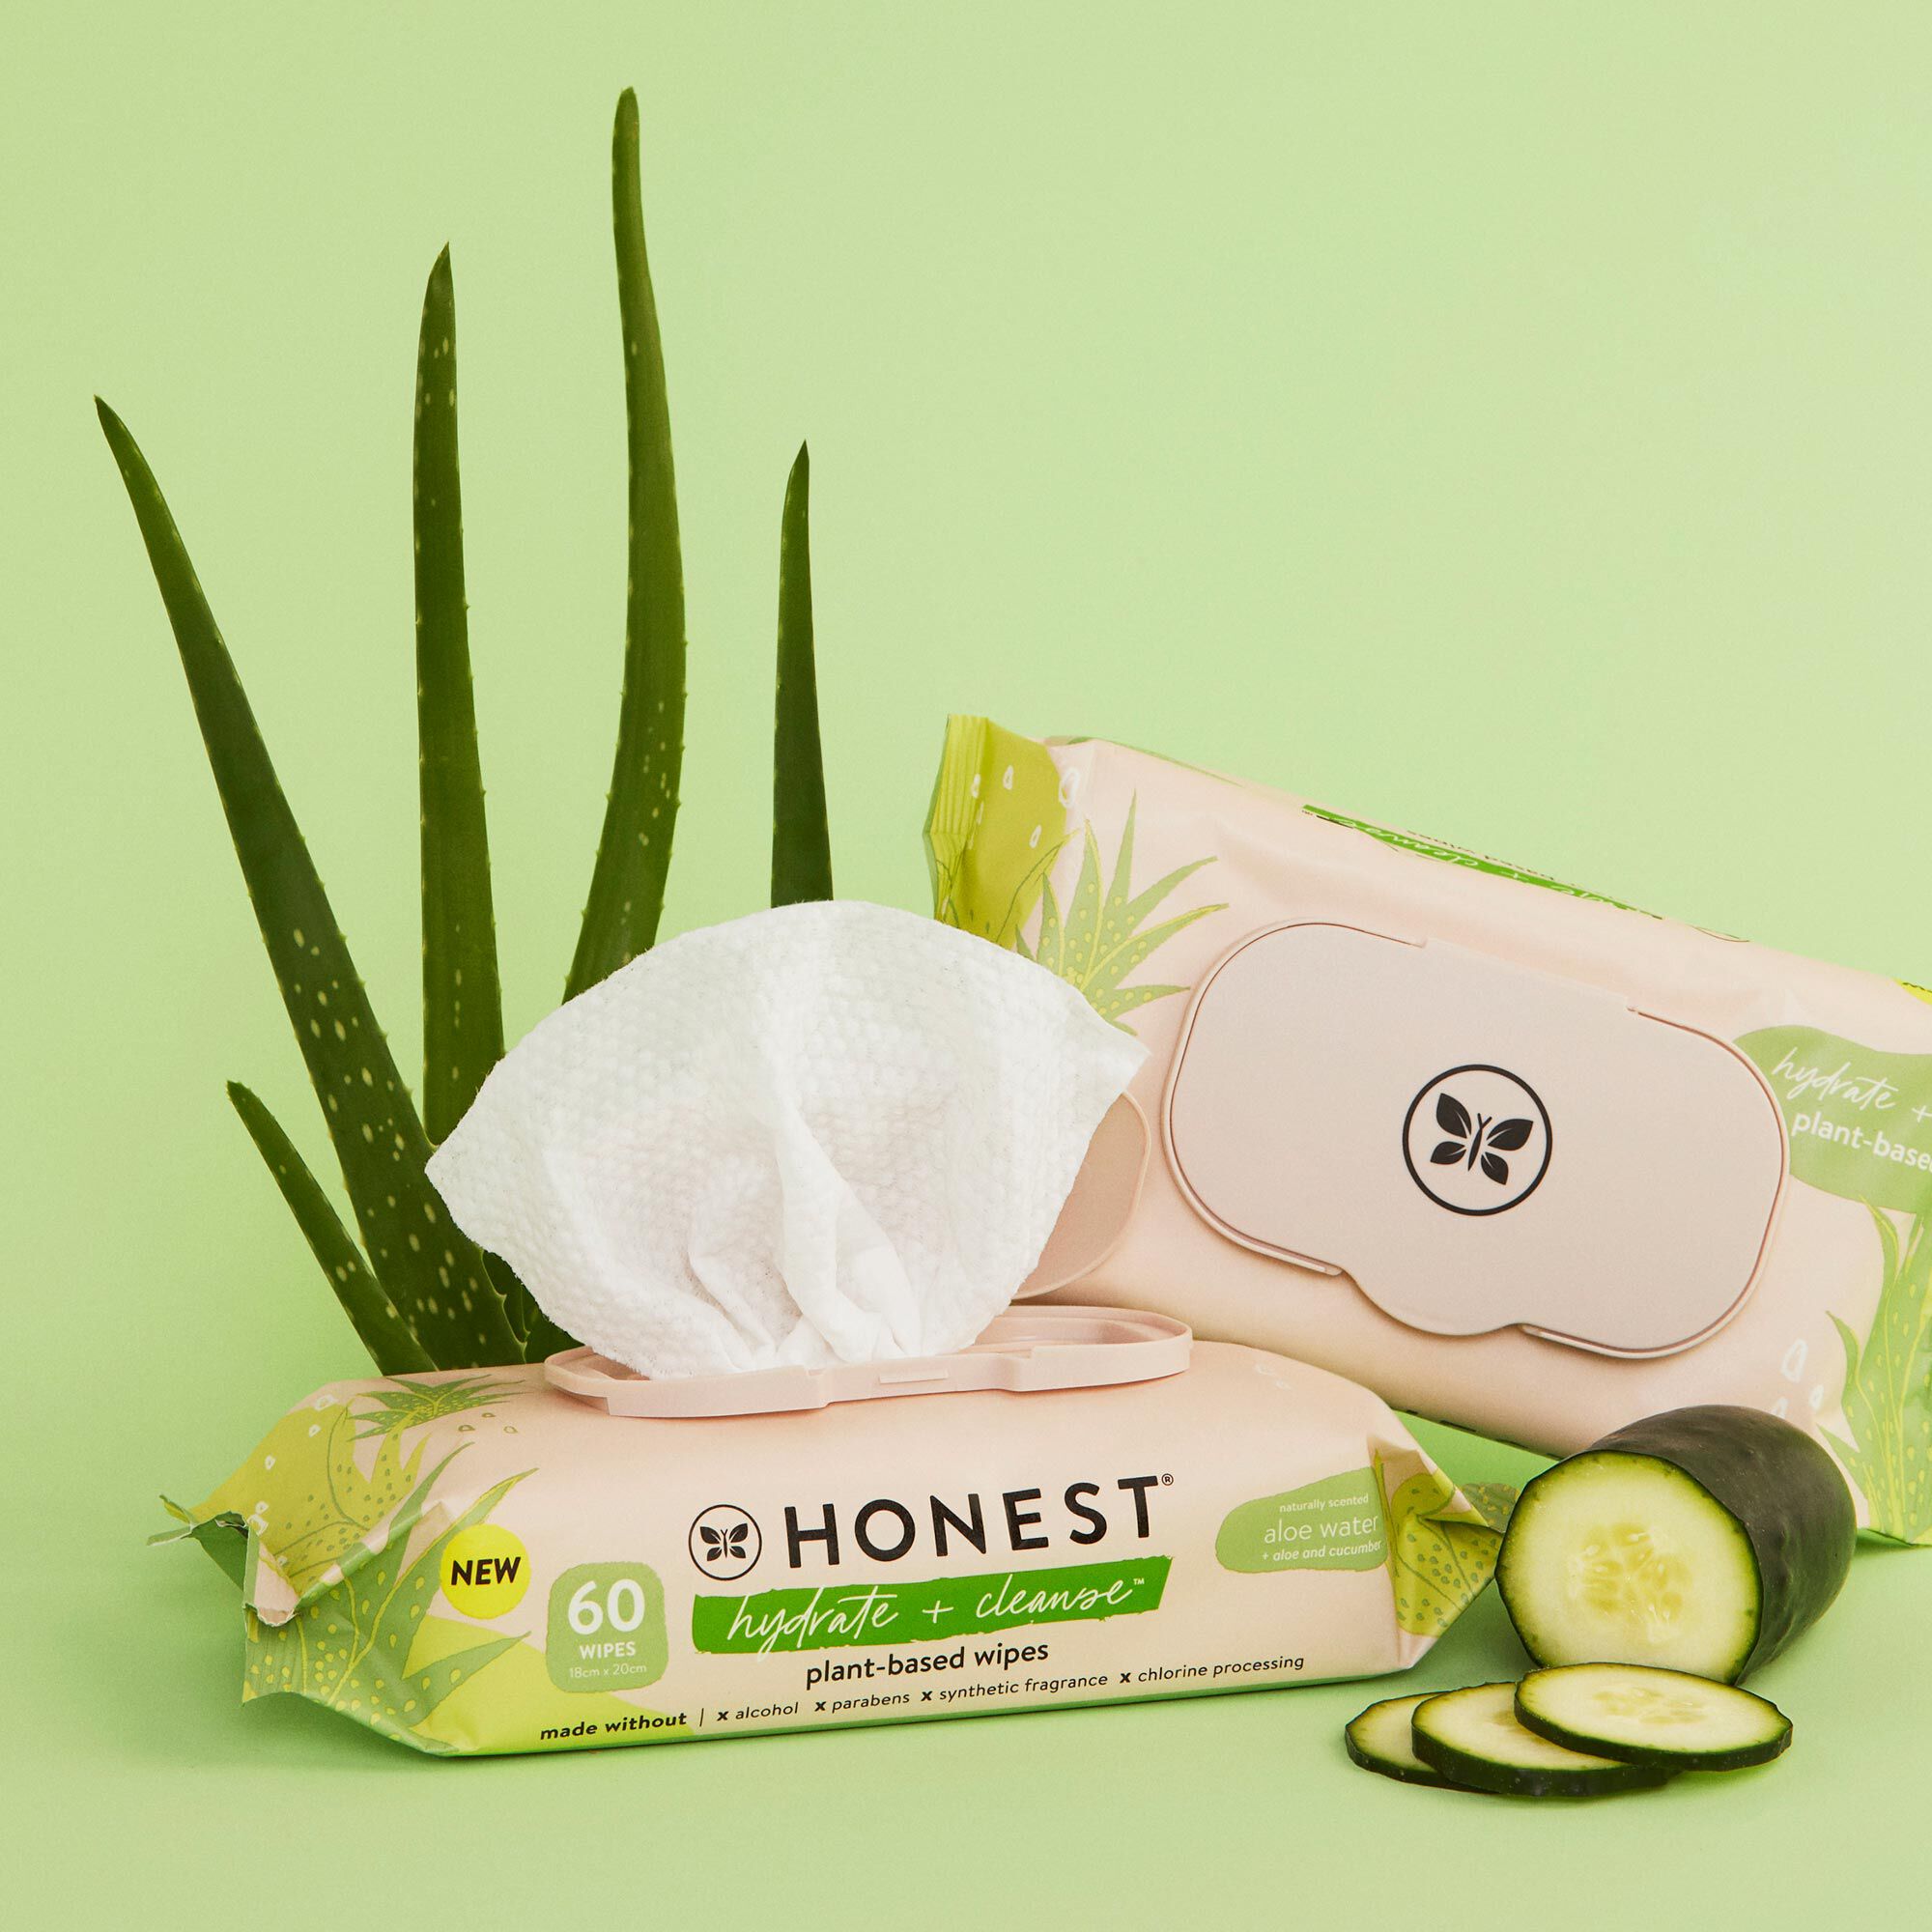 https://www.honest.com/dw/image/v2/BDBW_PRD/on/demandware.static/-/Sites-HC-master-catalog/default/dw5b1805a6/images/large/all-wipes-evergreen-campaign/benefit/NOURISH_HYDRATE_INGREDIENT_0003.jpg?sw=2000&sh=2000&sm=fit